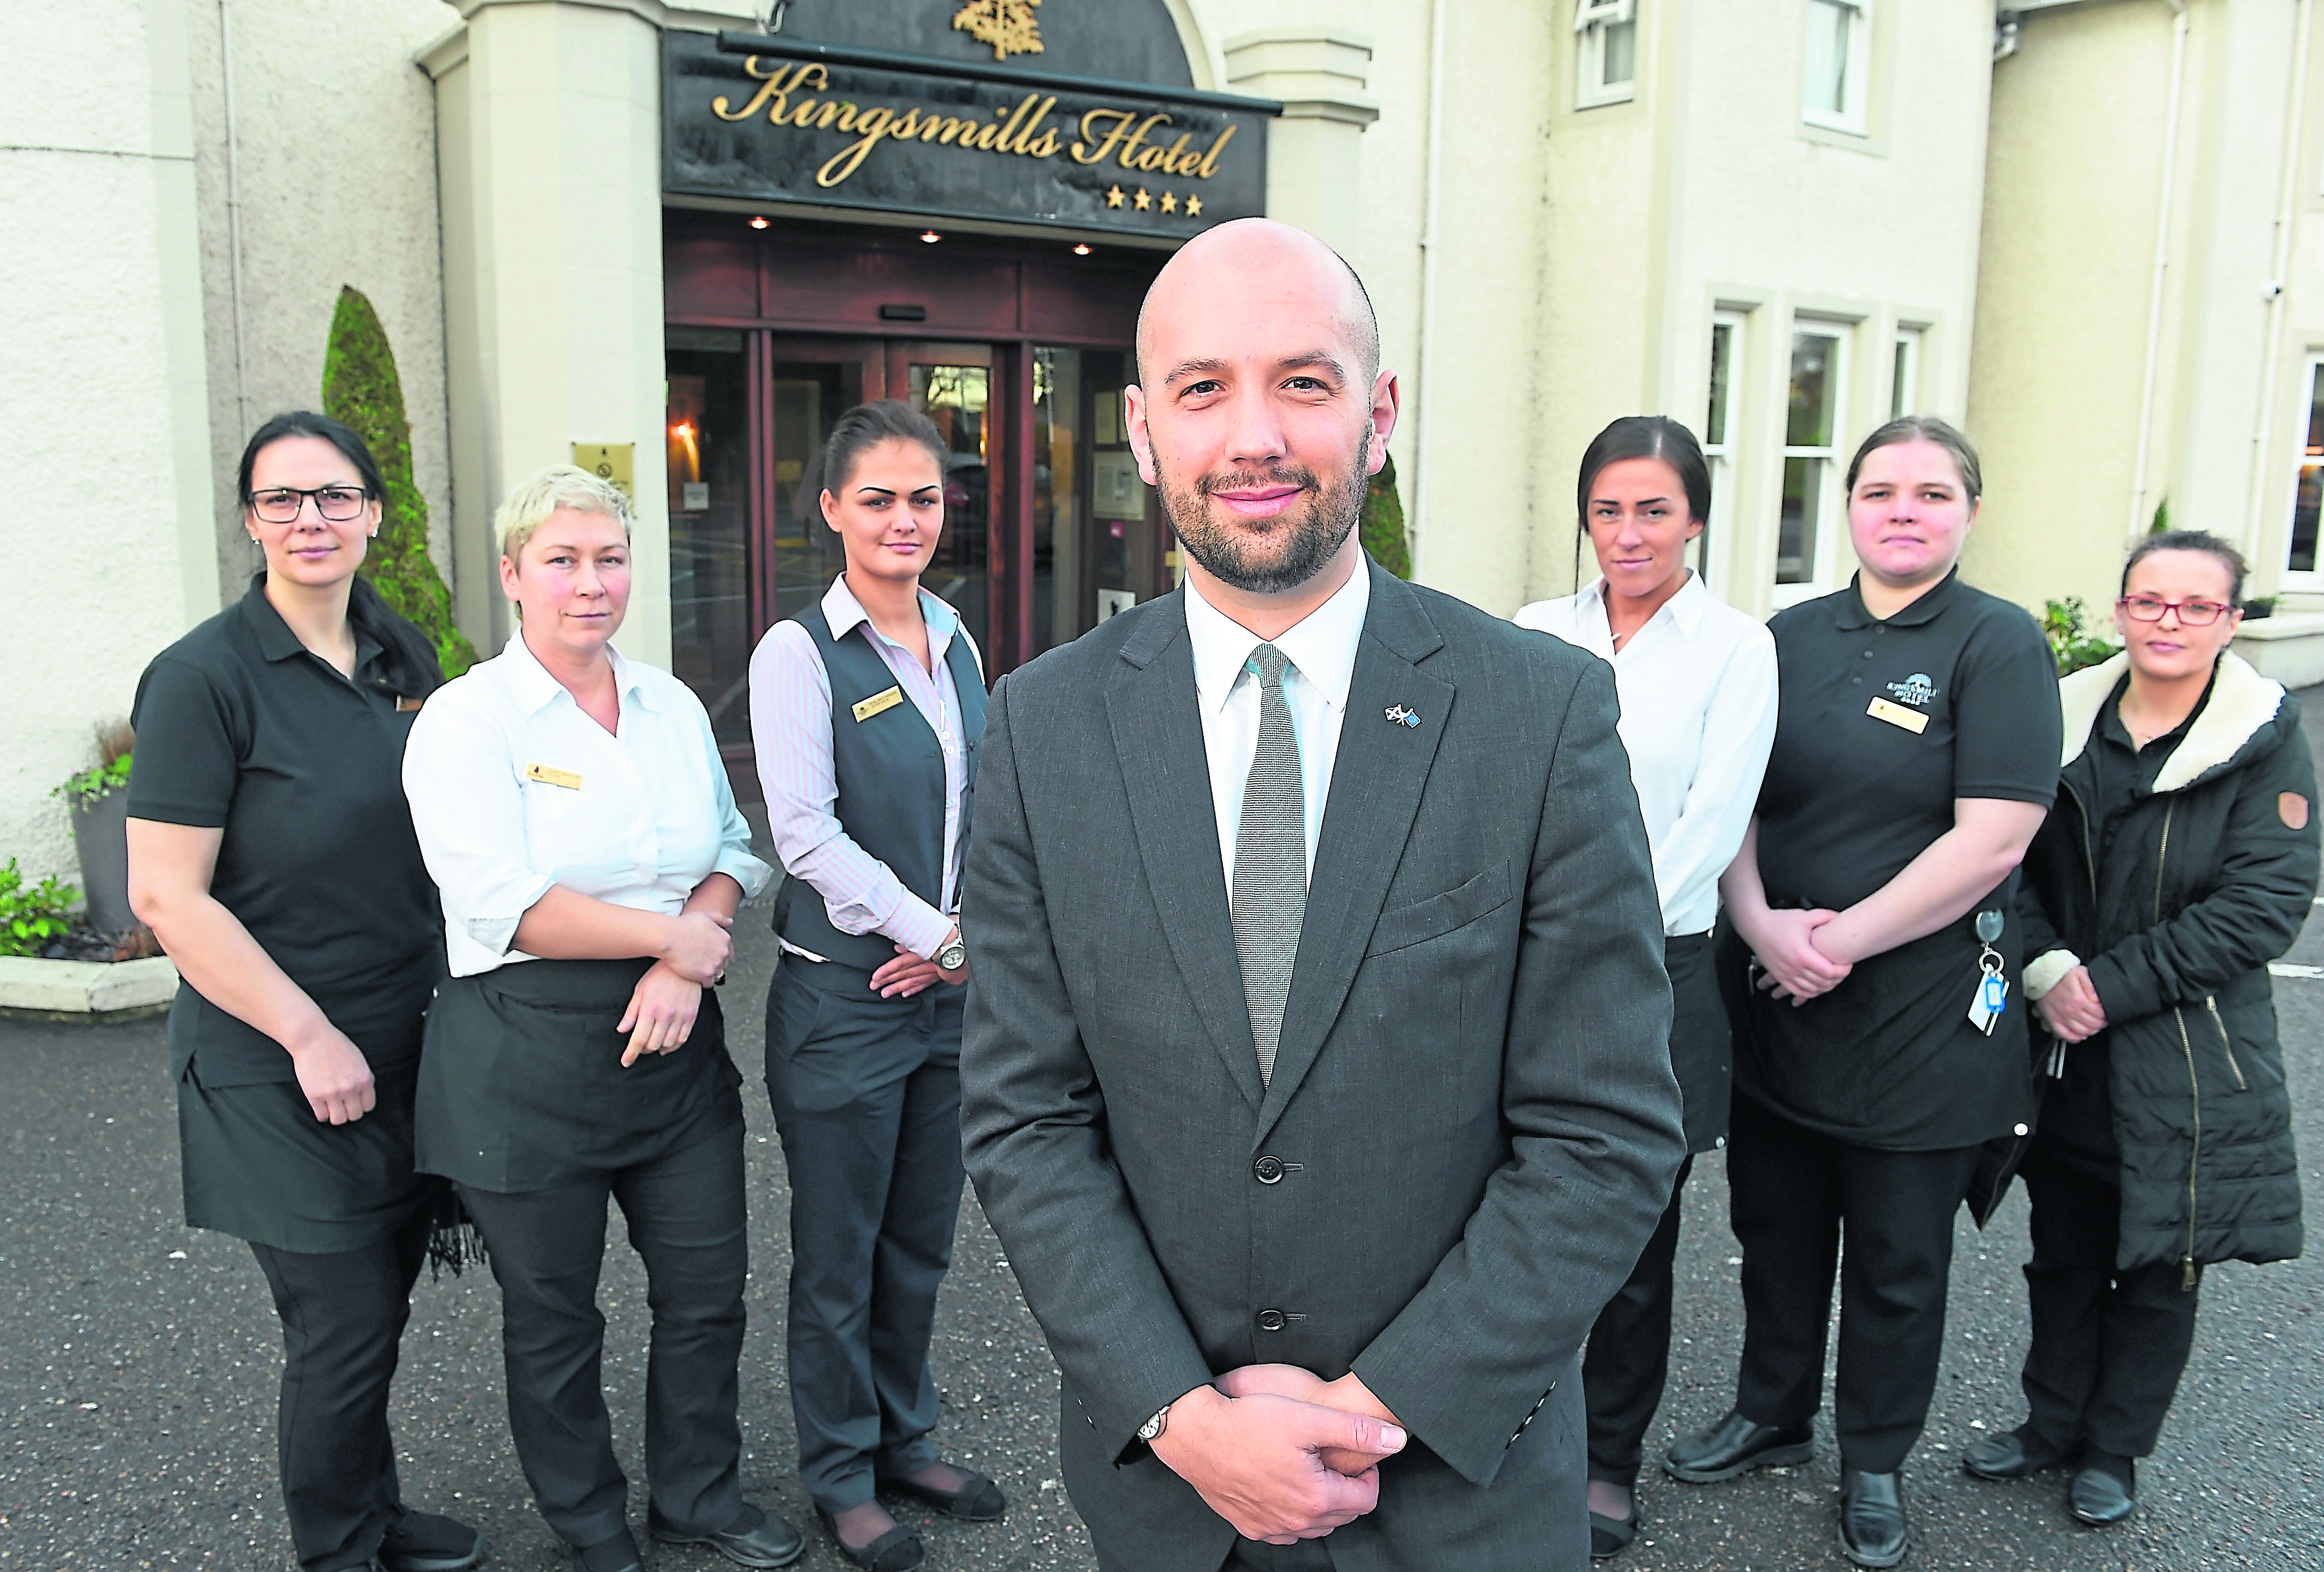 Migration Minister Ben Macpherson  in Invernress for talks in the Kingsmills Hotel where he also met  members of staff from across Europe.